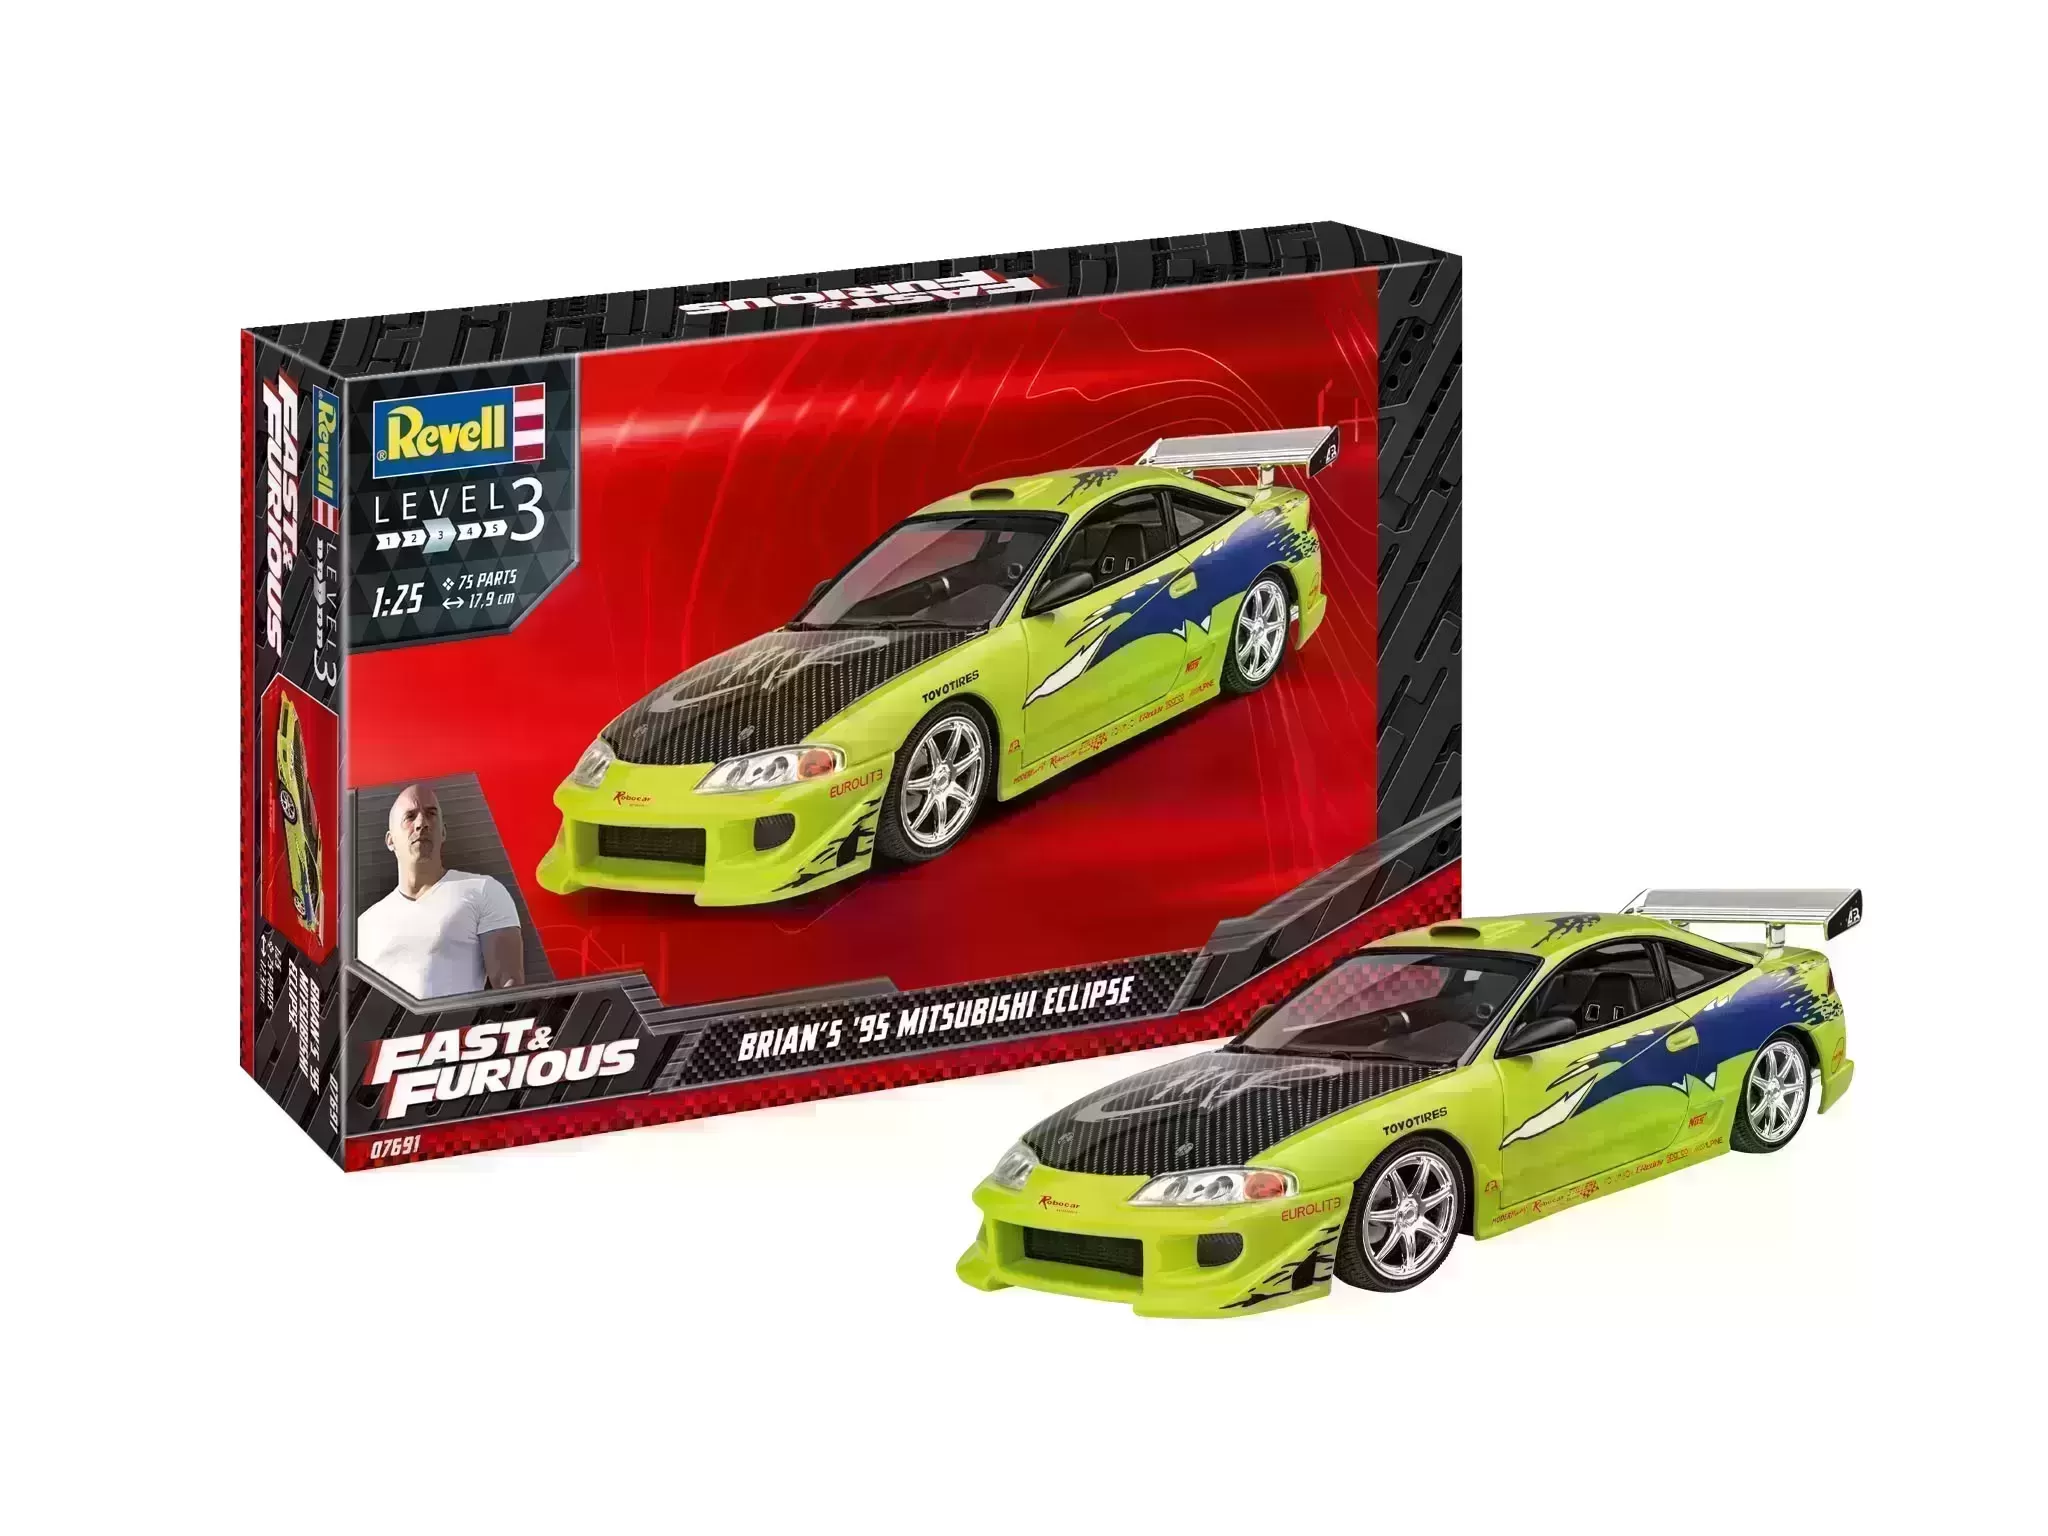 Modelset Fast and Furious: Brians 1995 Mitsubishi Eclipse - 1:24